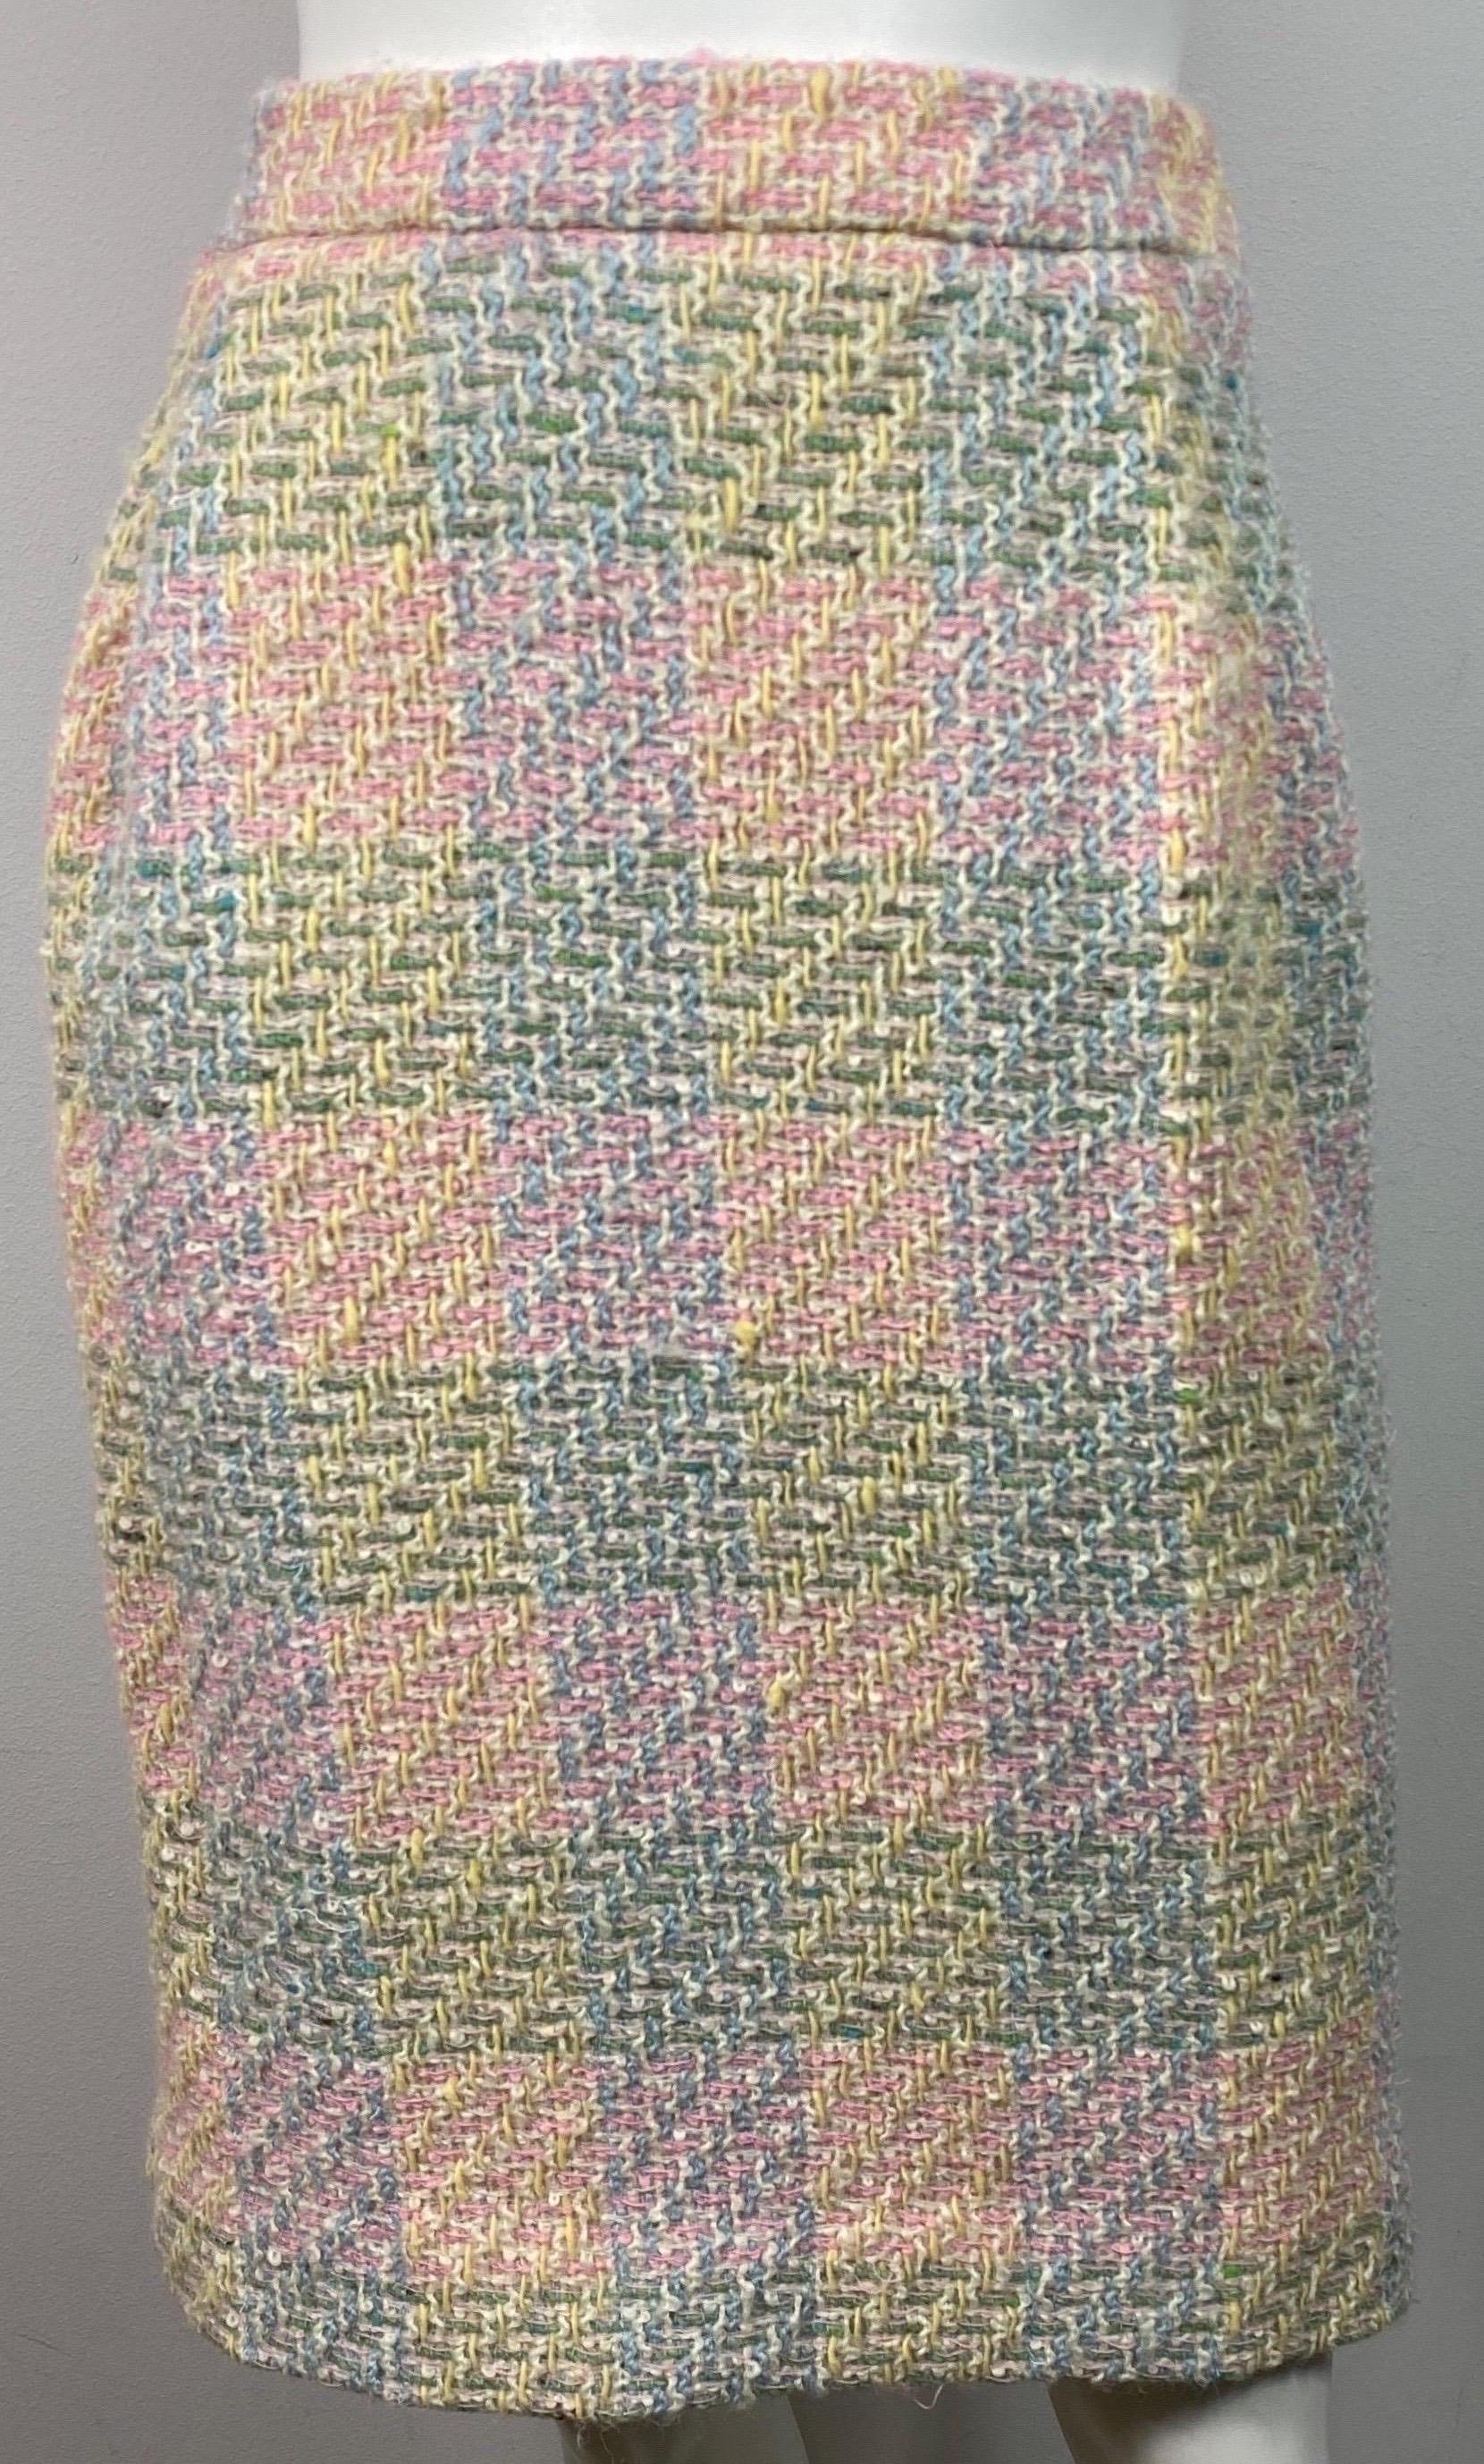 Chanel 1990’s Pastel Boucle Tweed Skirt - Size 42  This classic 1990’s skirt is made of a Pink, Yellow, Green and Light Blue Boucle Tweed and is lined in a light blue silk. The skirt has a 9” zipper with a hidden button and 1 Gold Chanel button at